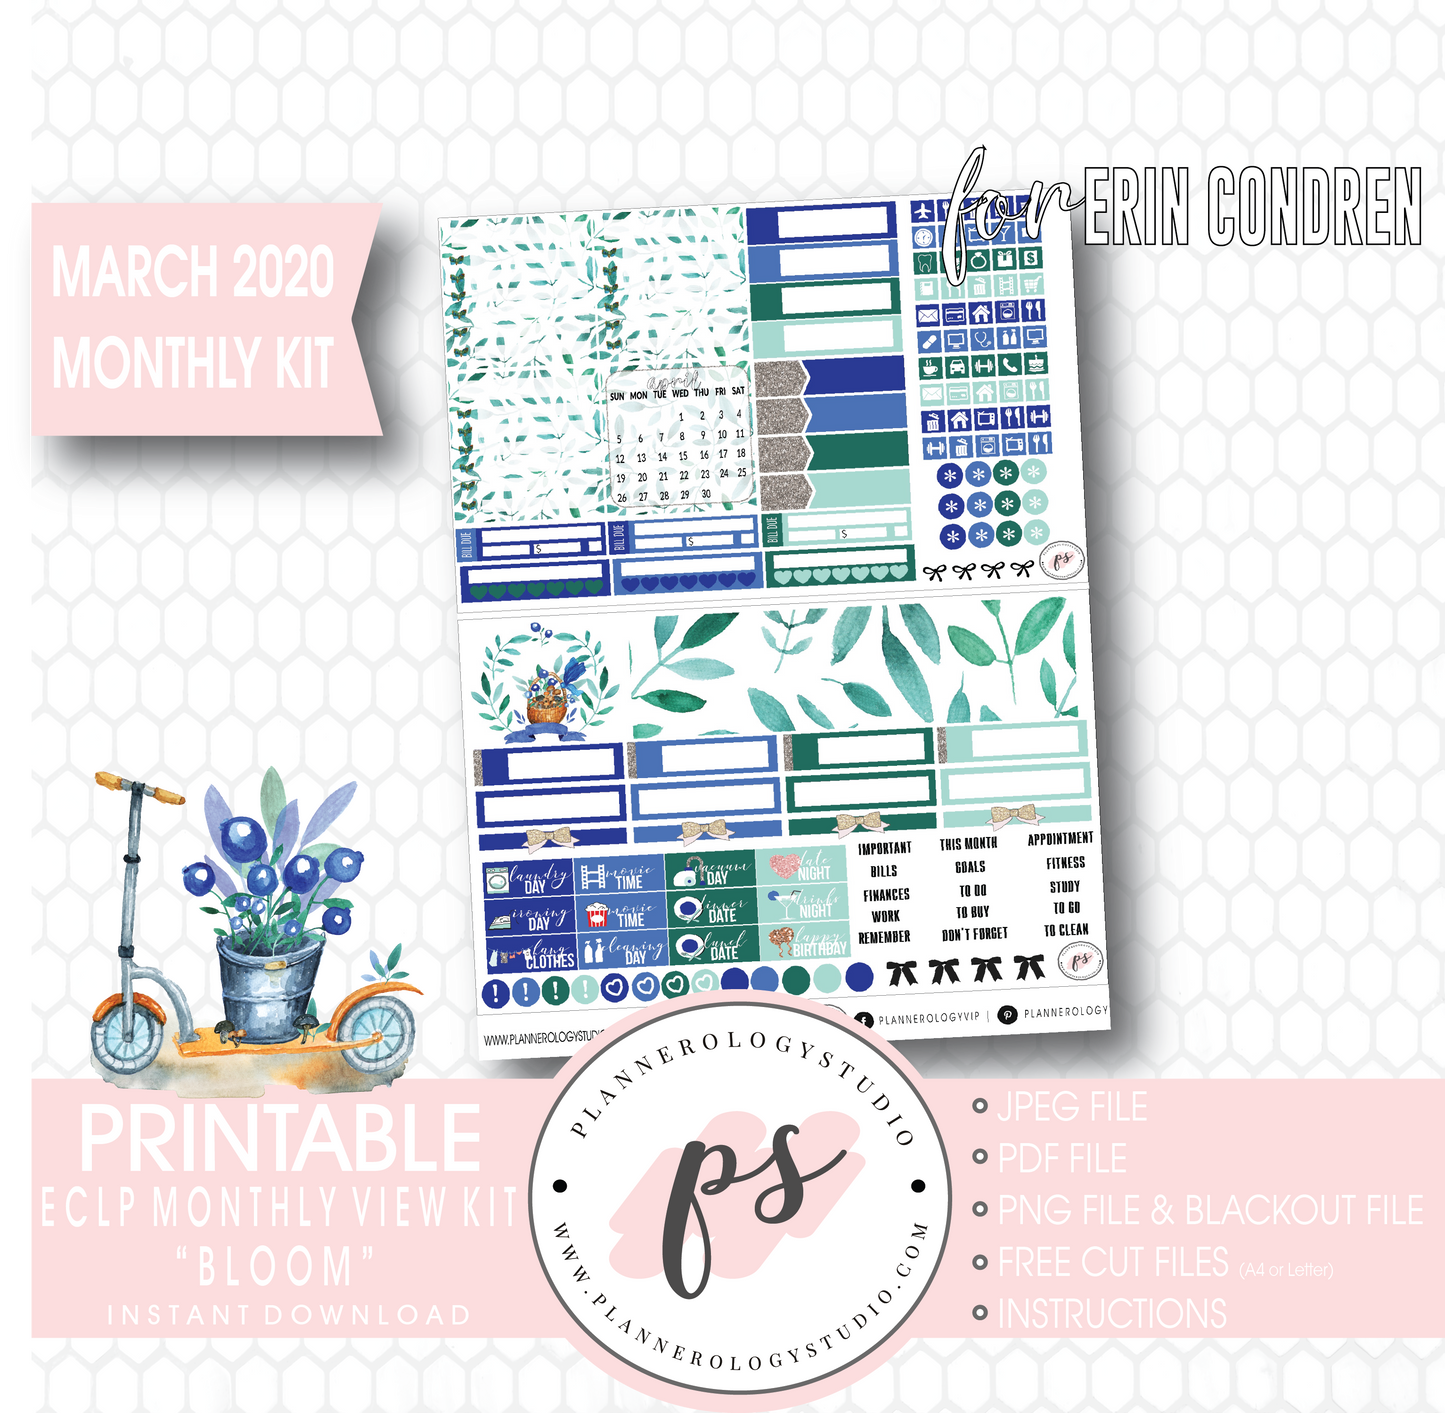 Bloom March 2020 Monthly View Kit Digital Printable Planner Stickers (for use with Erin Condren) - Plannerologystudio